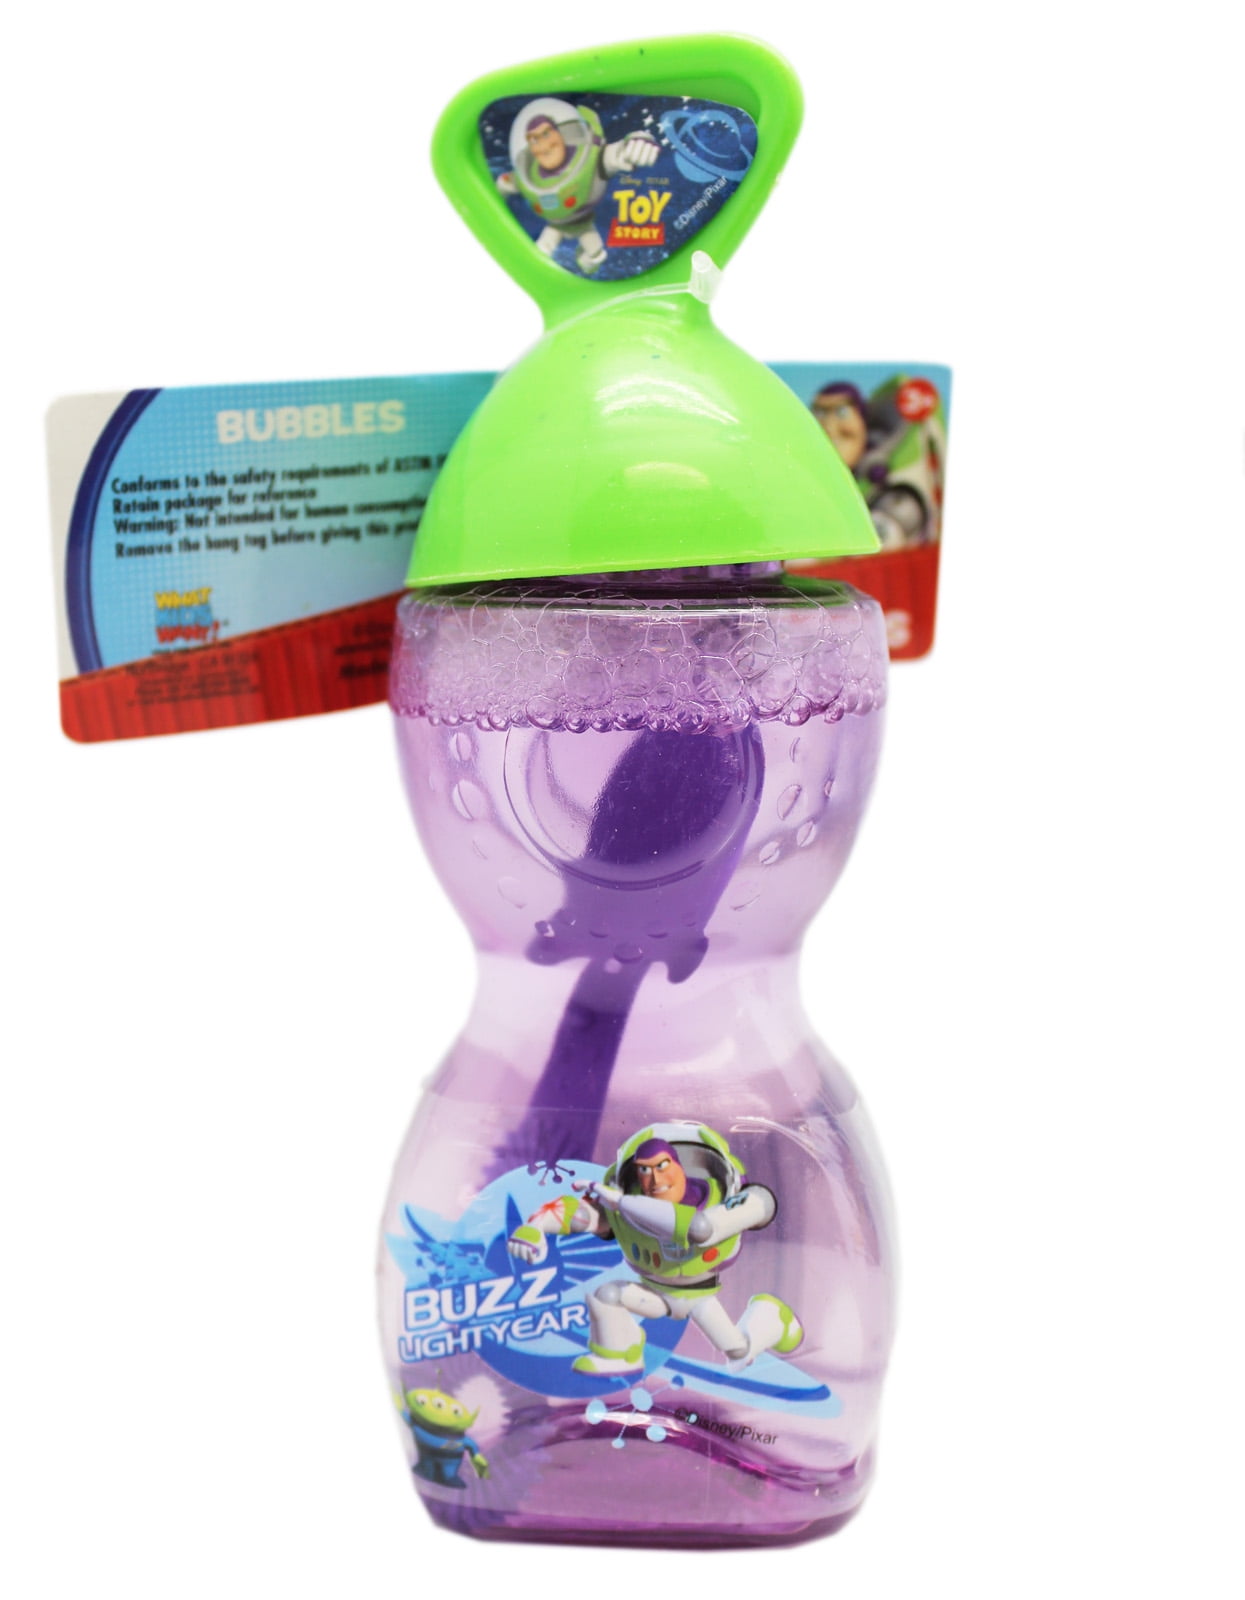 Disney Toy Story Bubble Mower With Buzz Lightyear Push Along Children Toy 